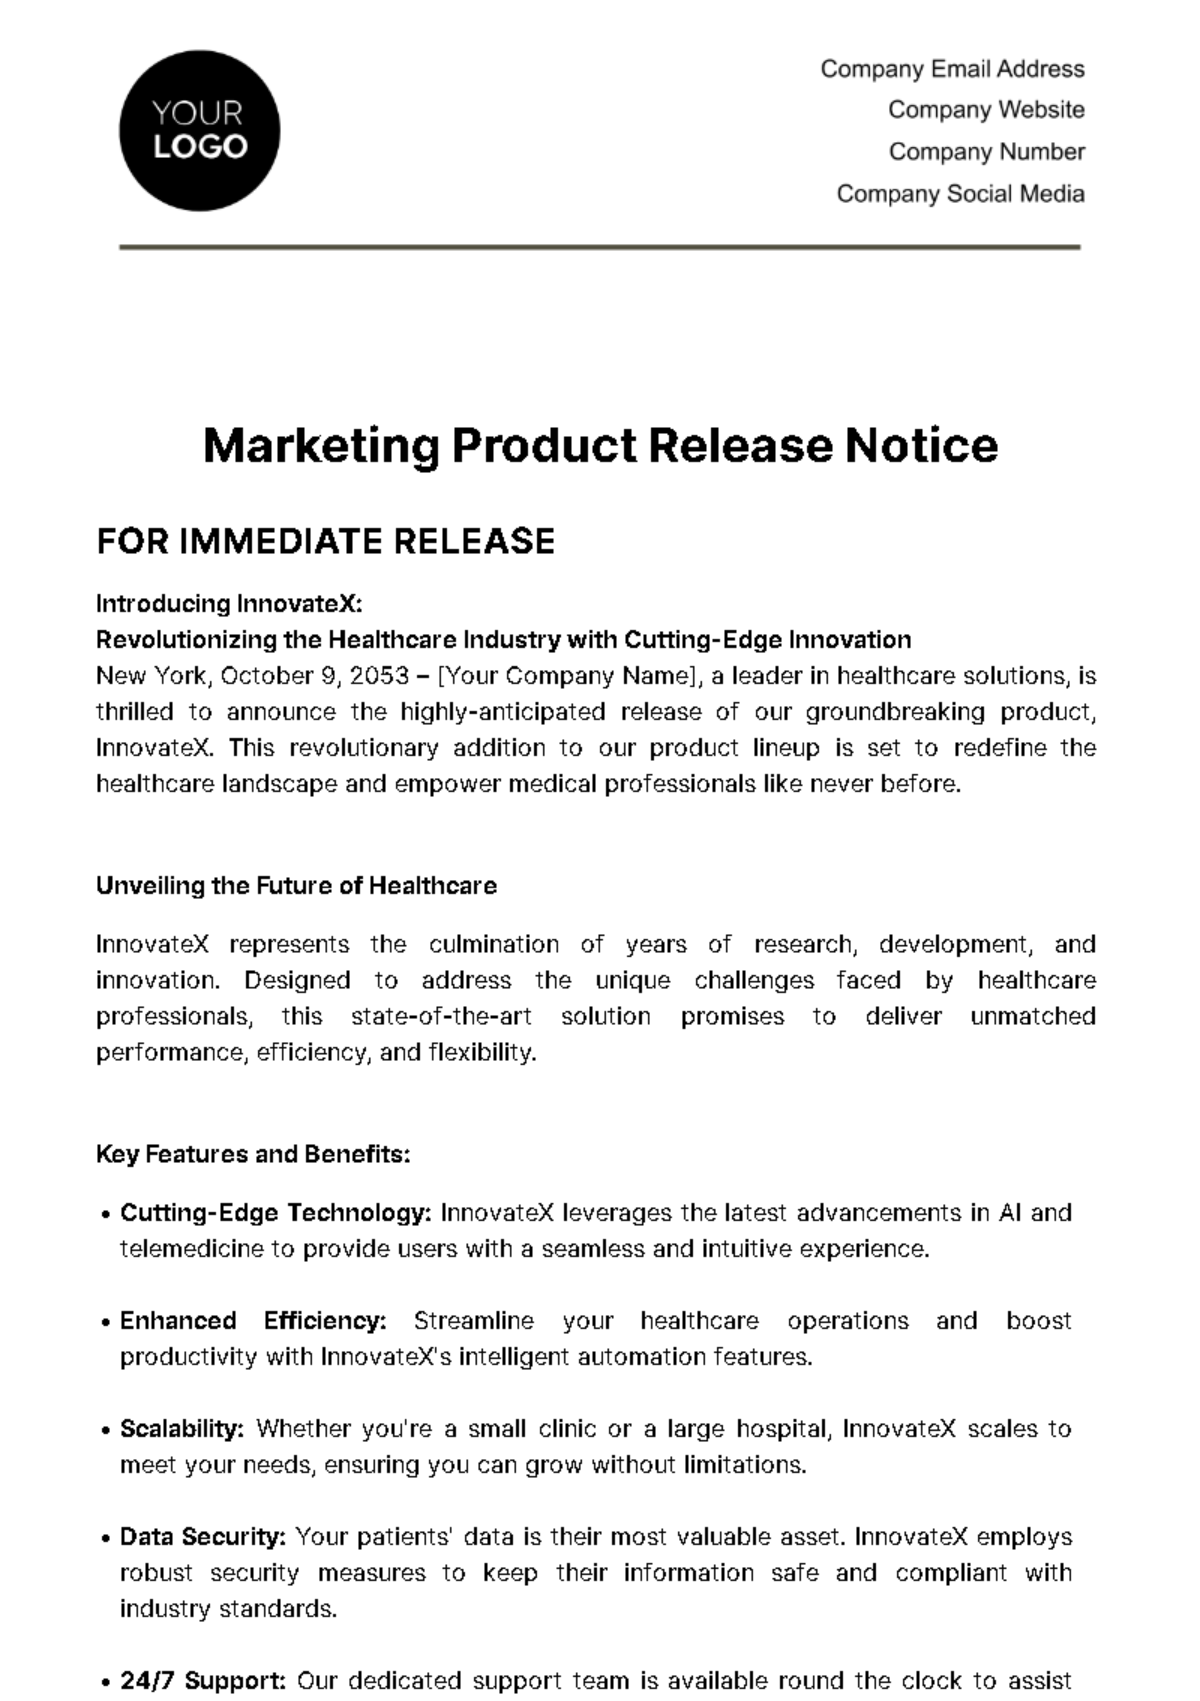 Free Marketing Product Release Notice Template